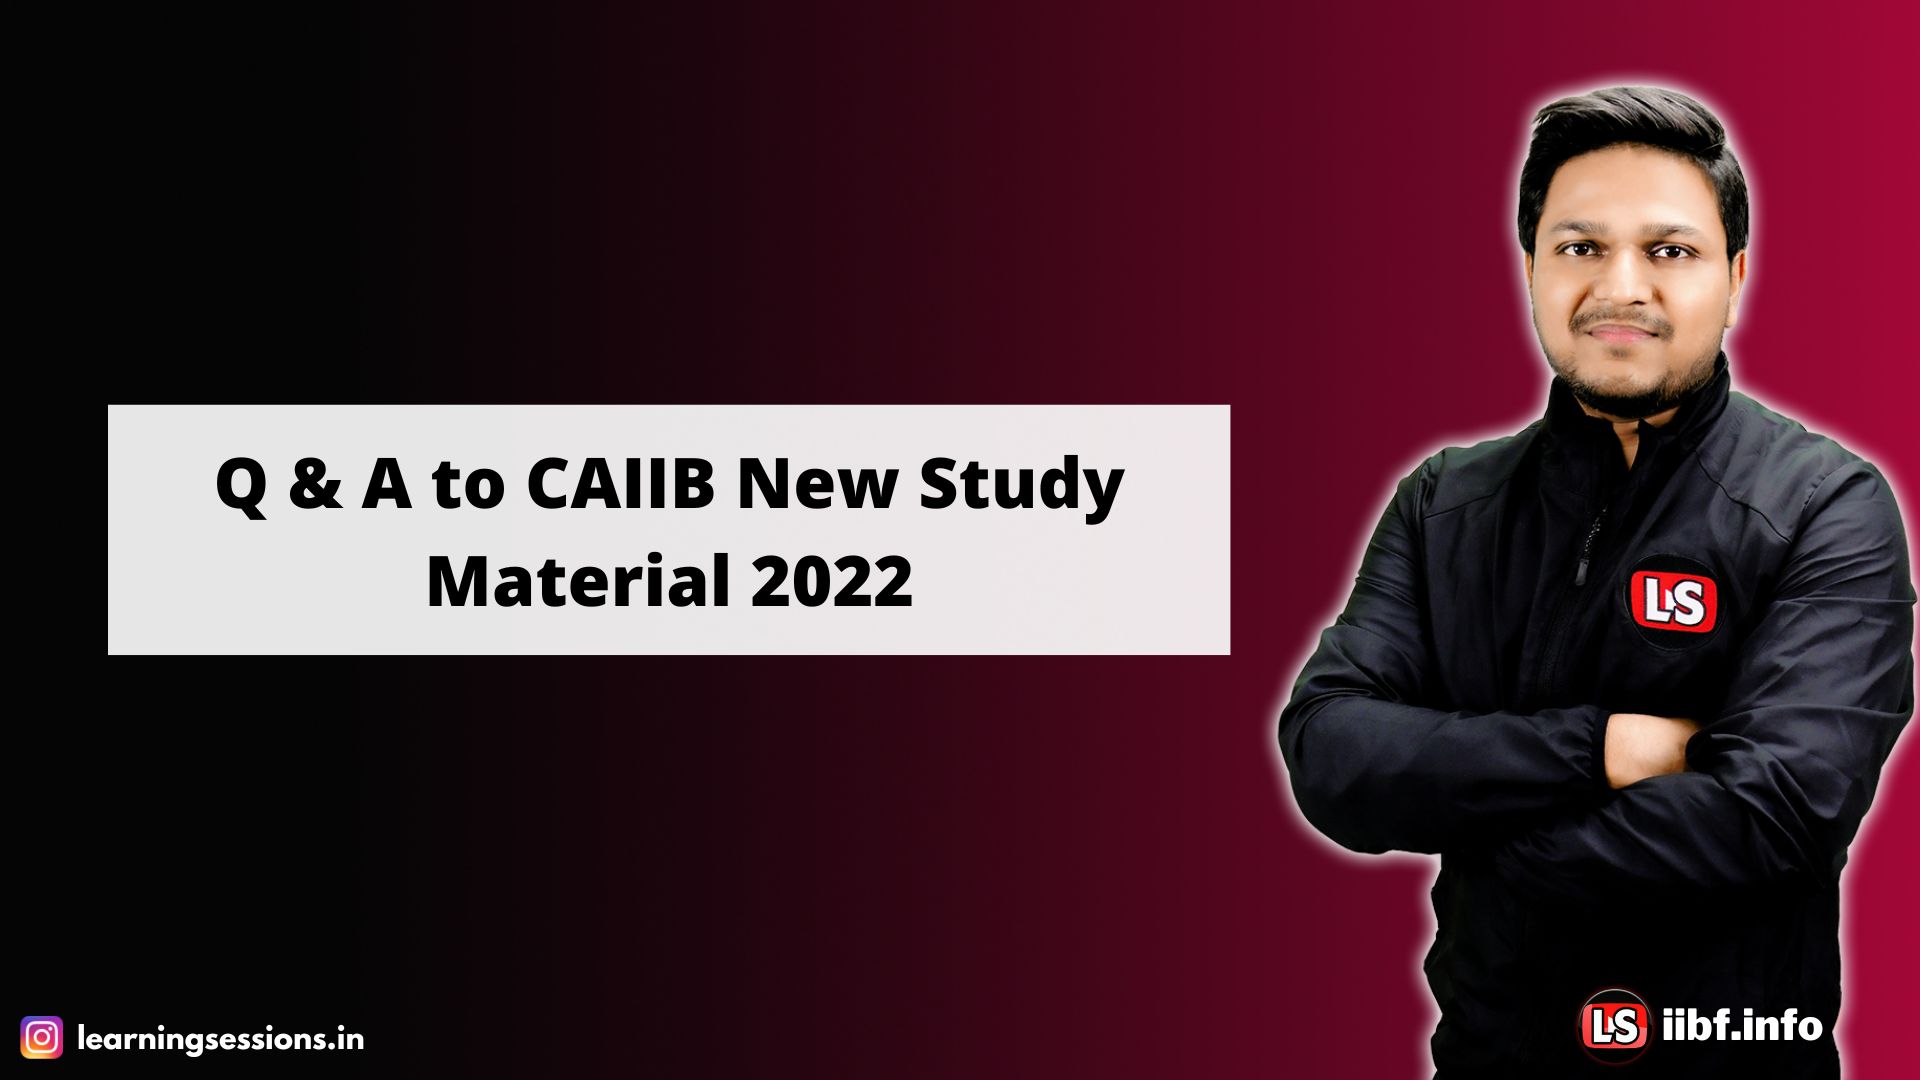 Q & A to CAIIB New Study Material 2022